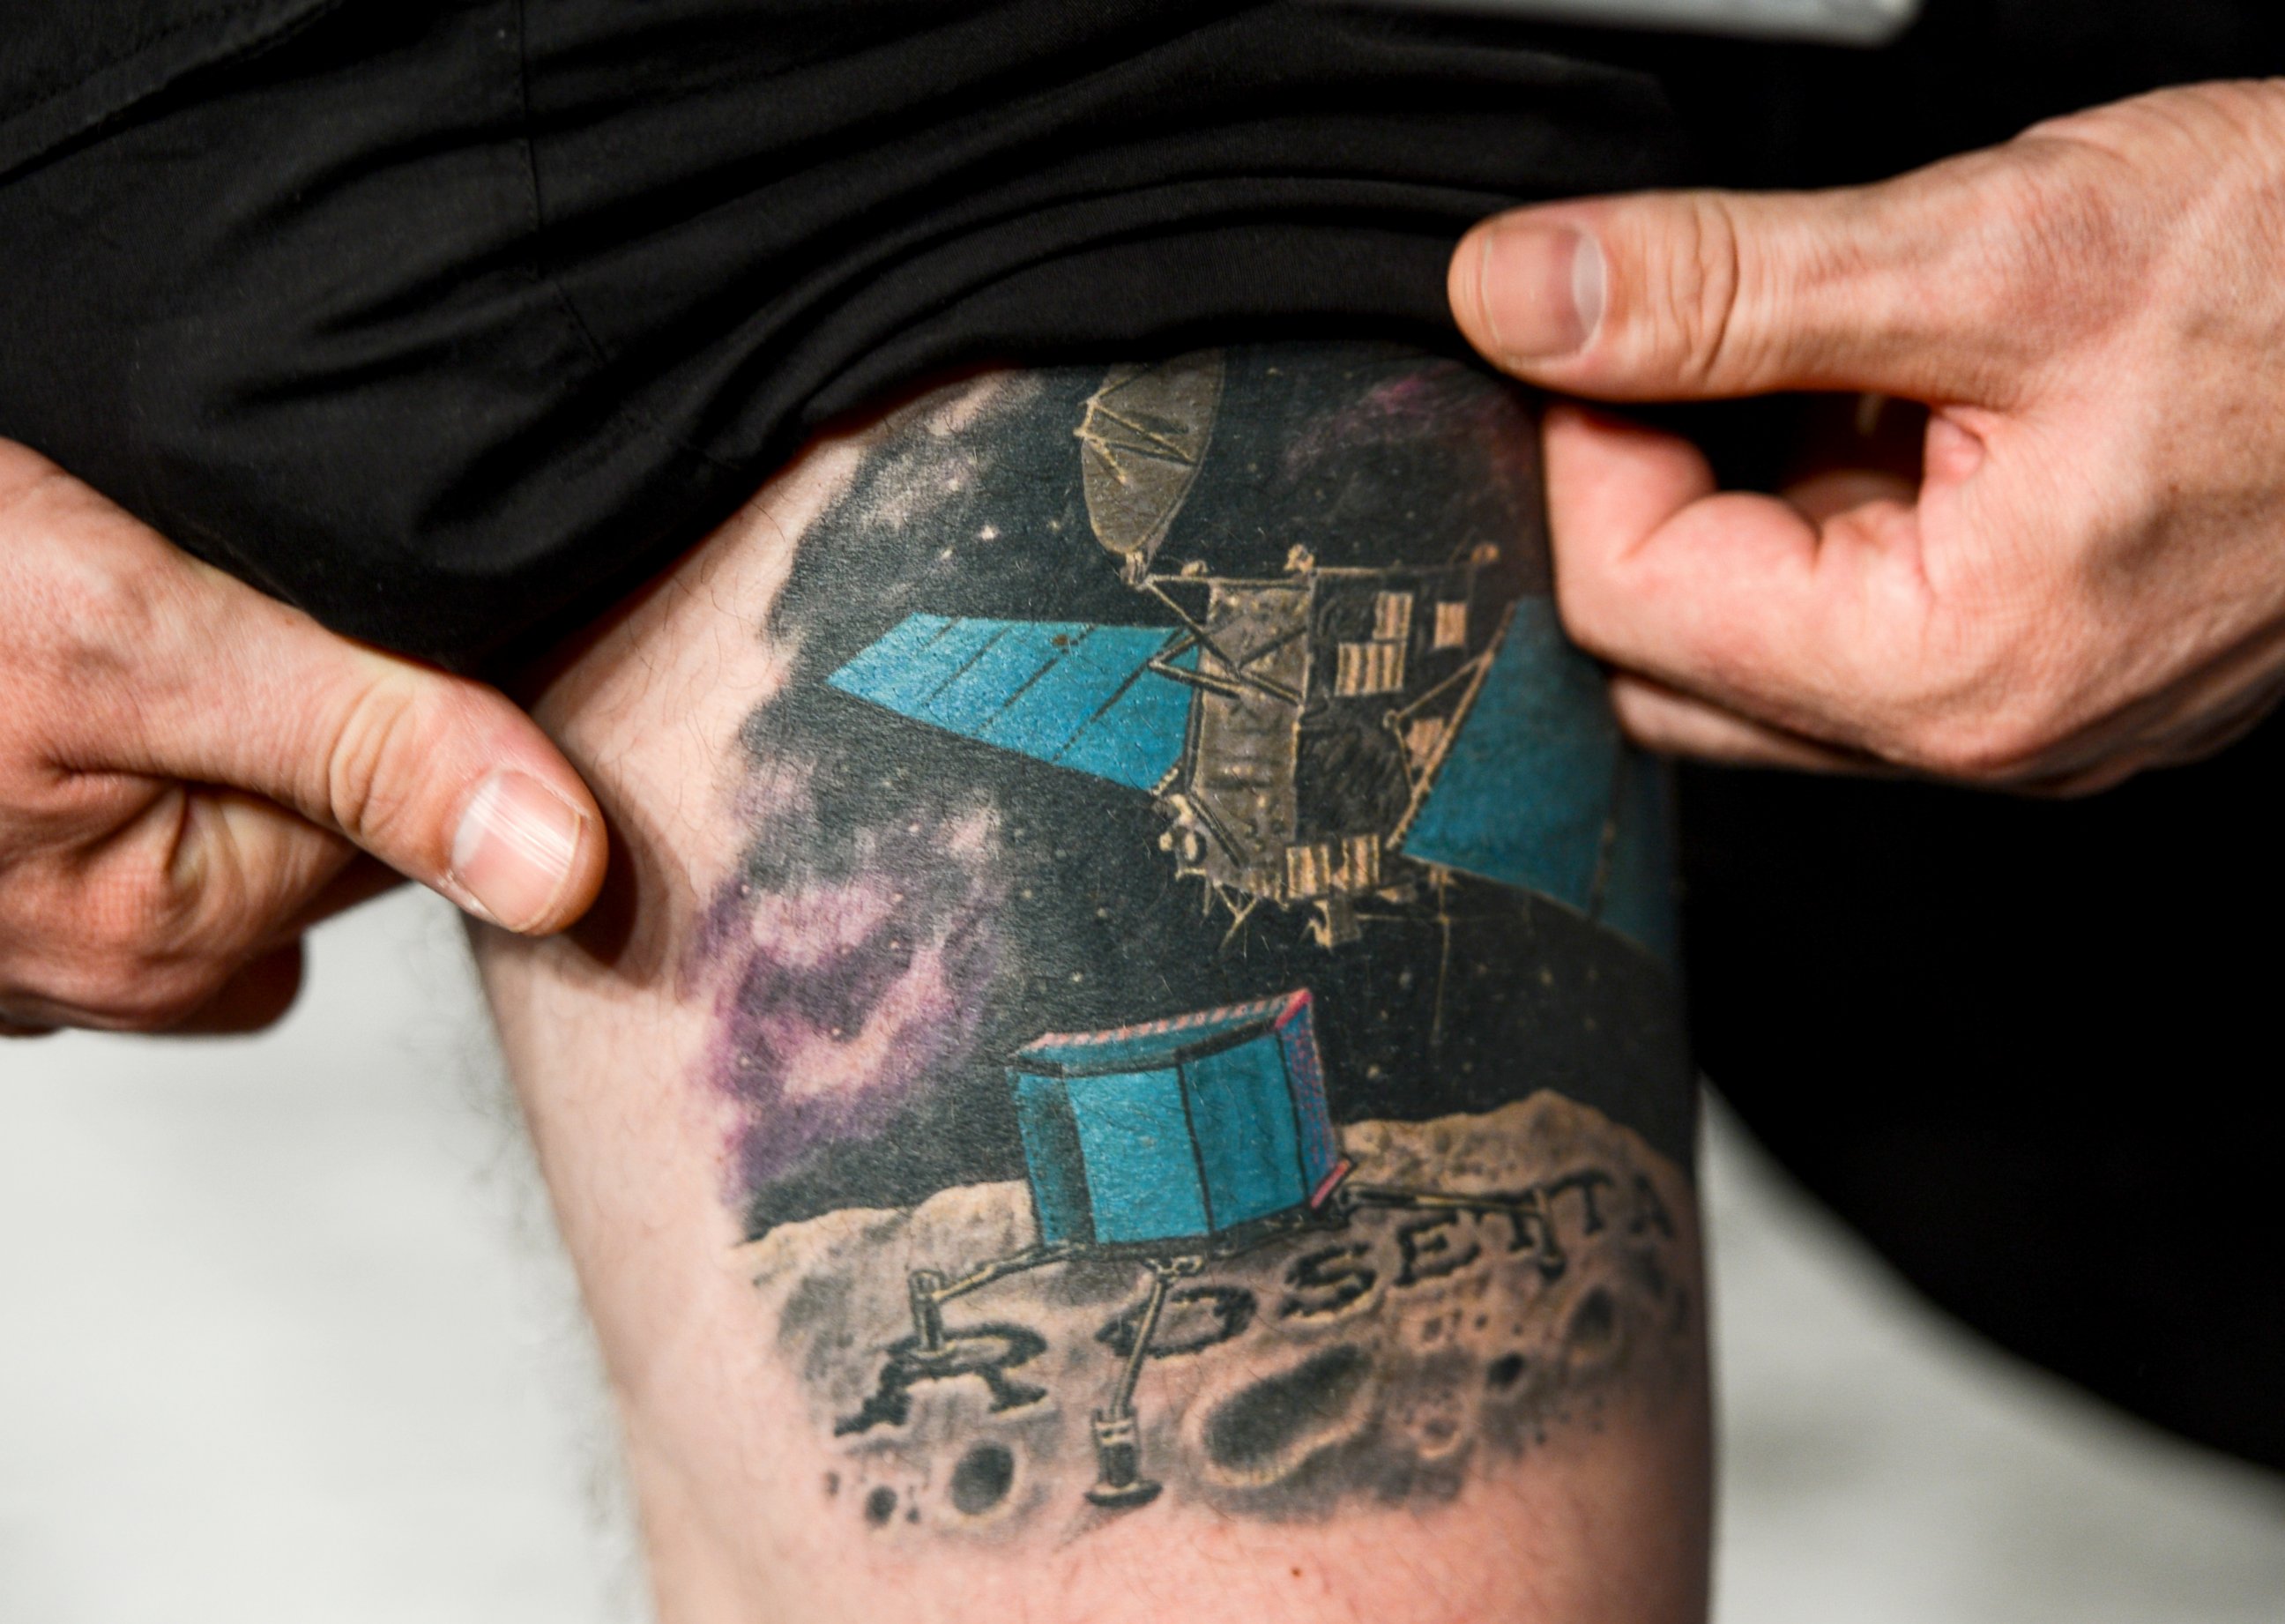 PHOTO: ESA physicist Matt Taylor shows his 'Rosetta' tattoo at the satellite control center of the European Space Agency (ESA) in Darmstadt, Germany, Nov. 12, 2014.